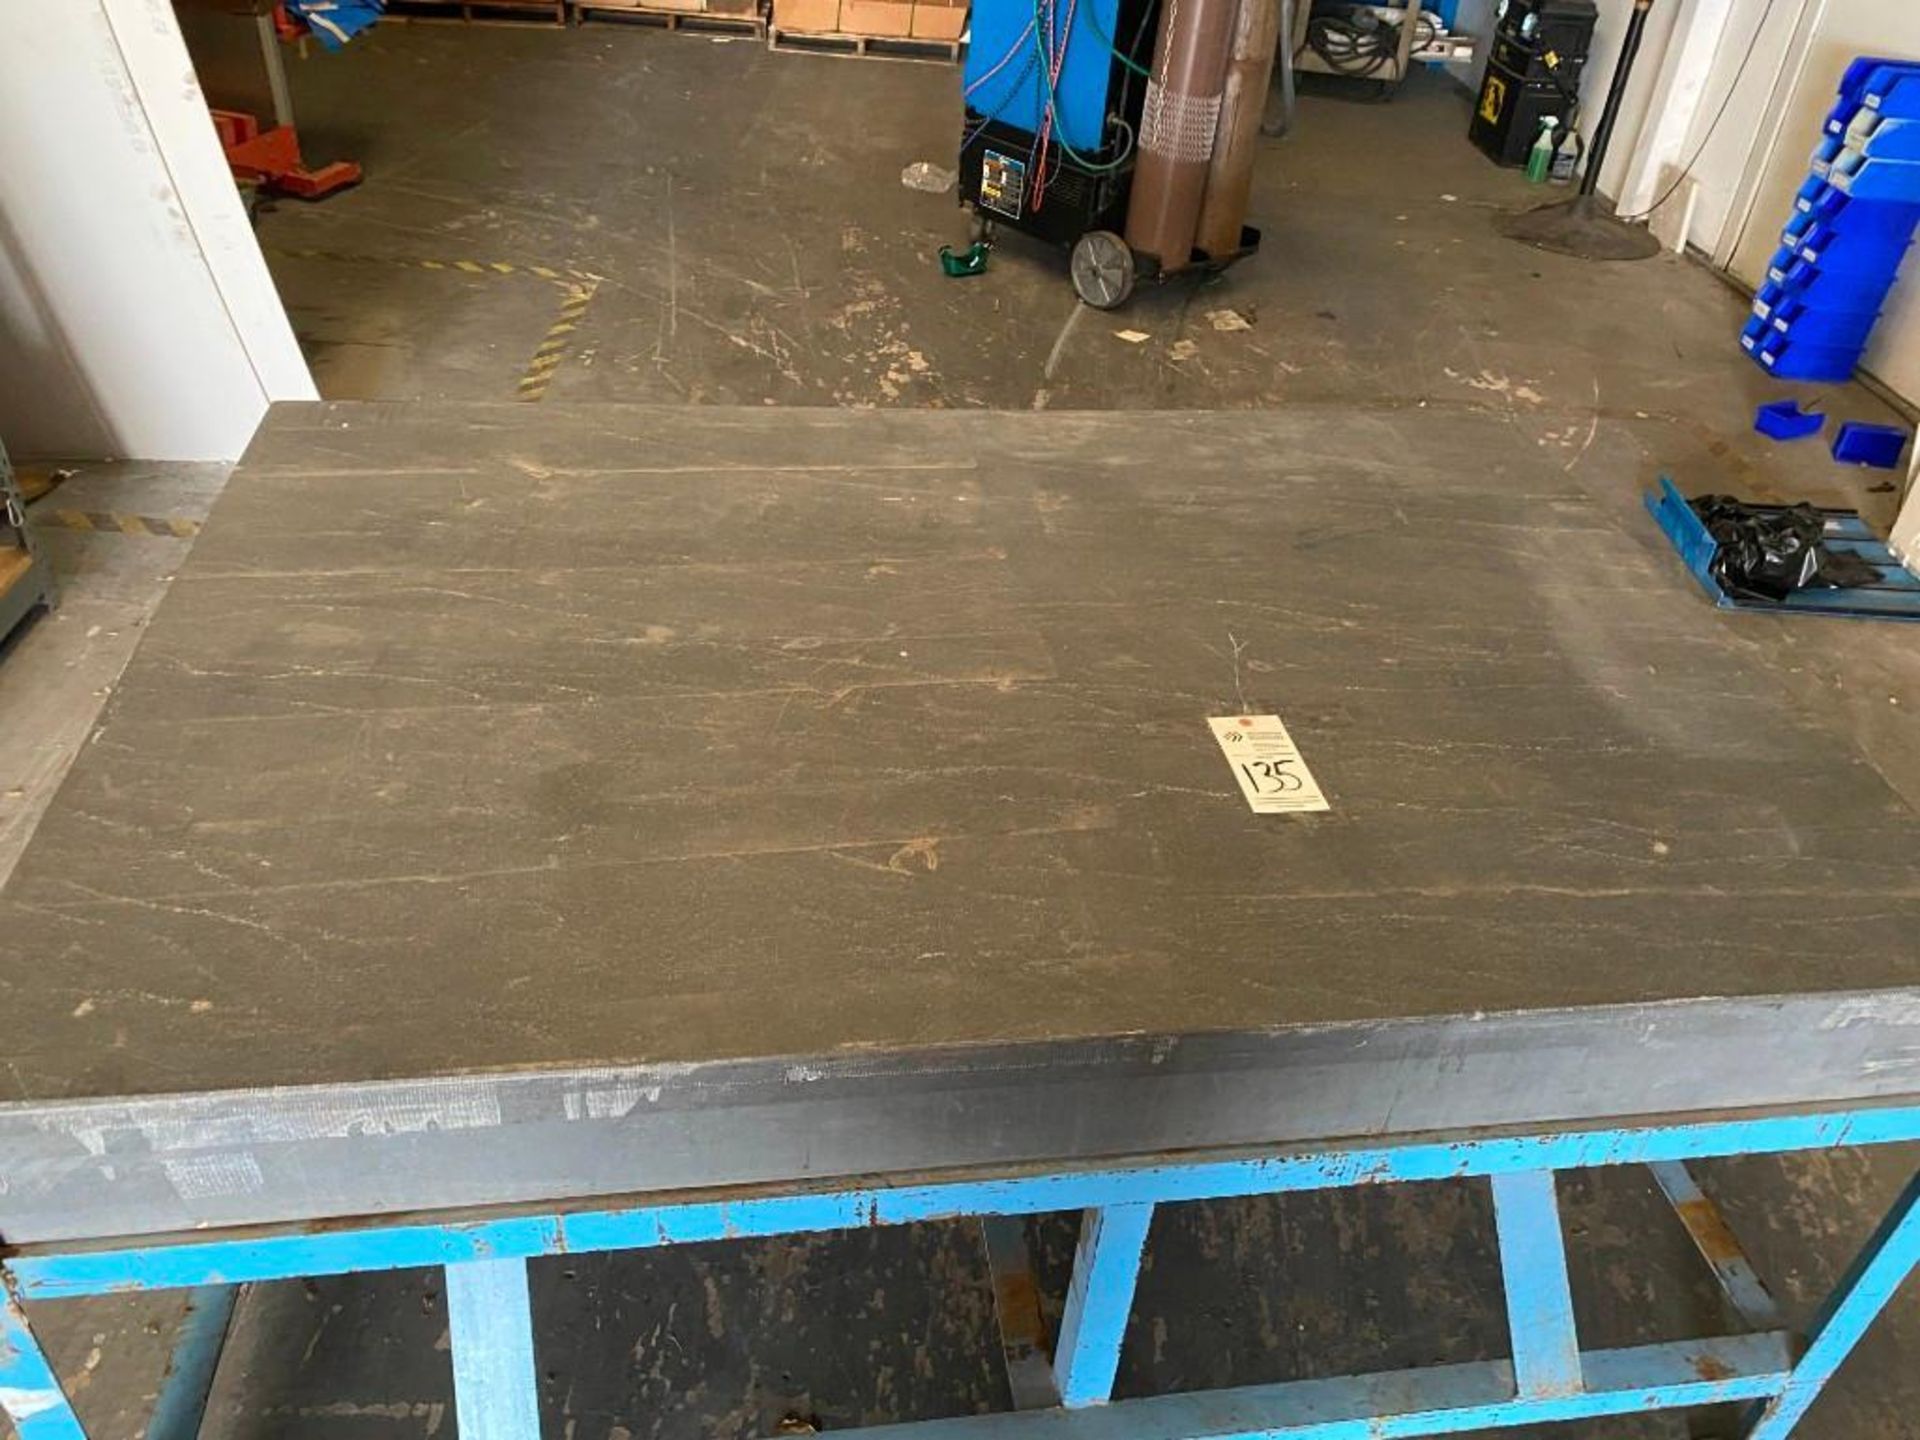 48" X 96" GRANITE WITH STAND BR INSPECTION TABLE - Image 2 of 2